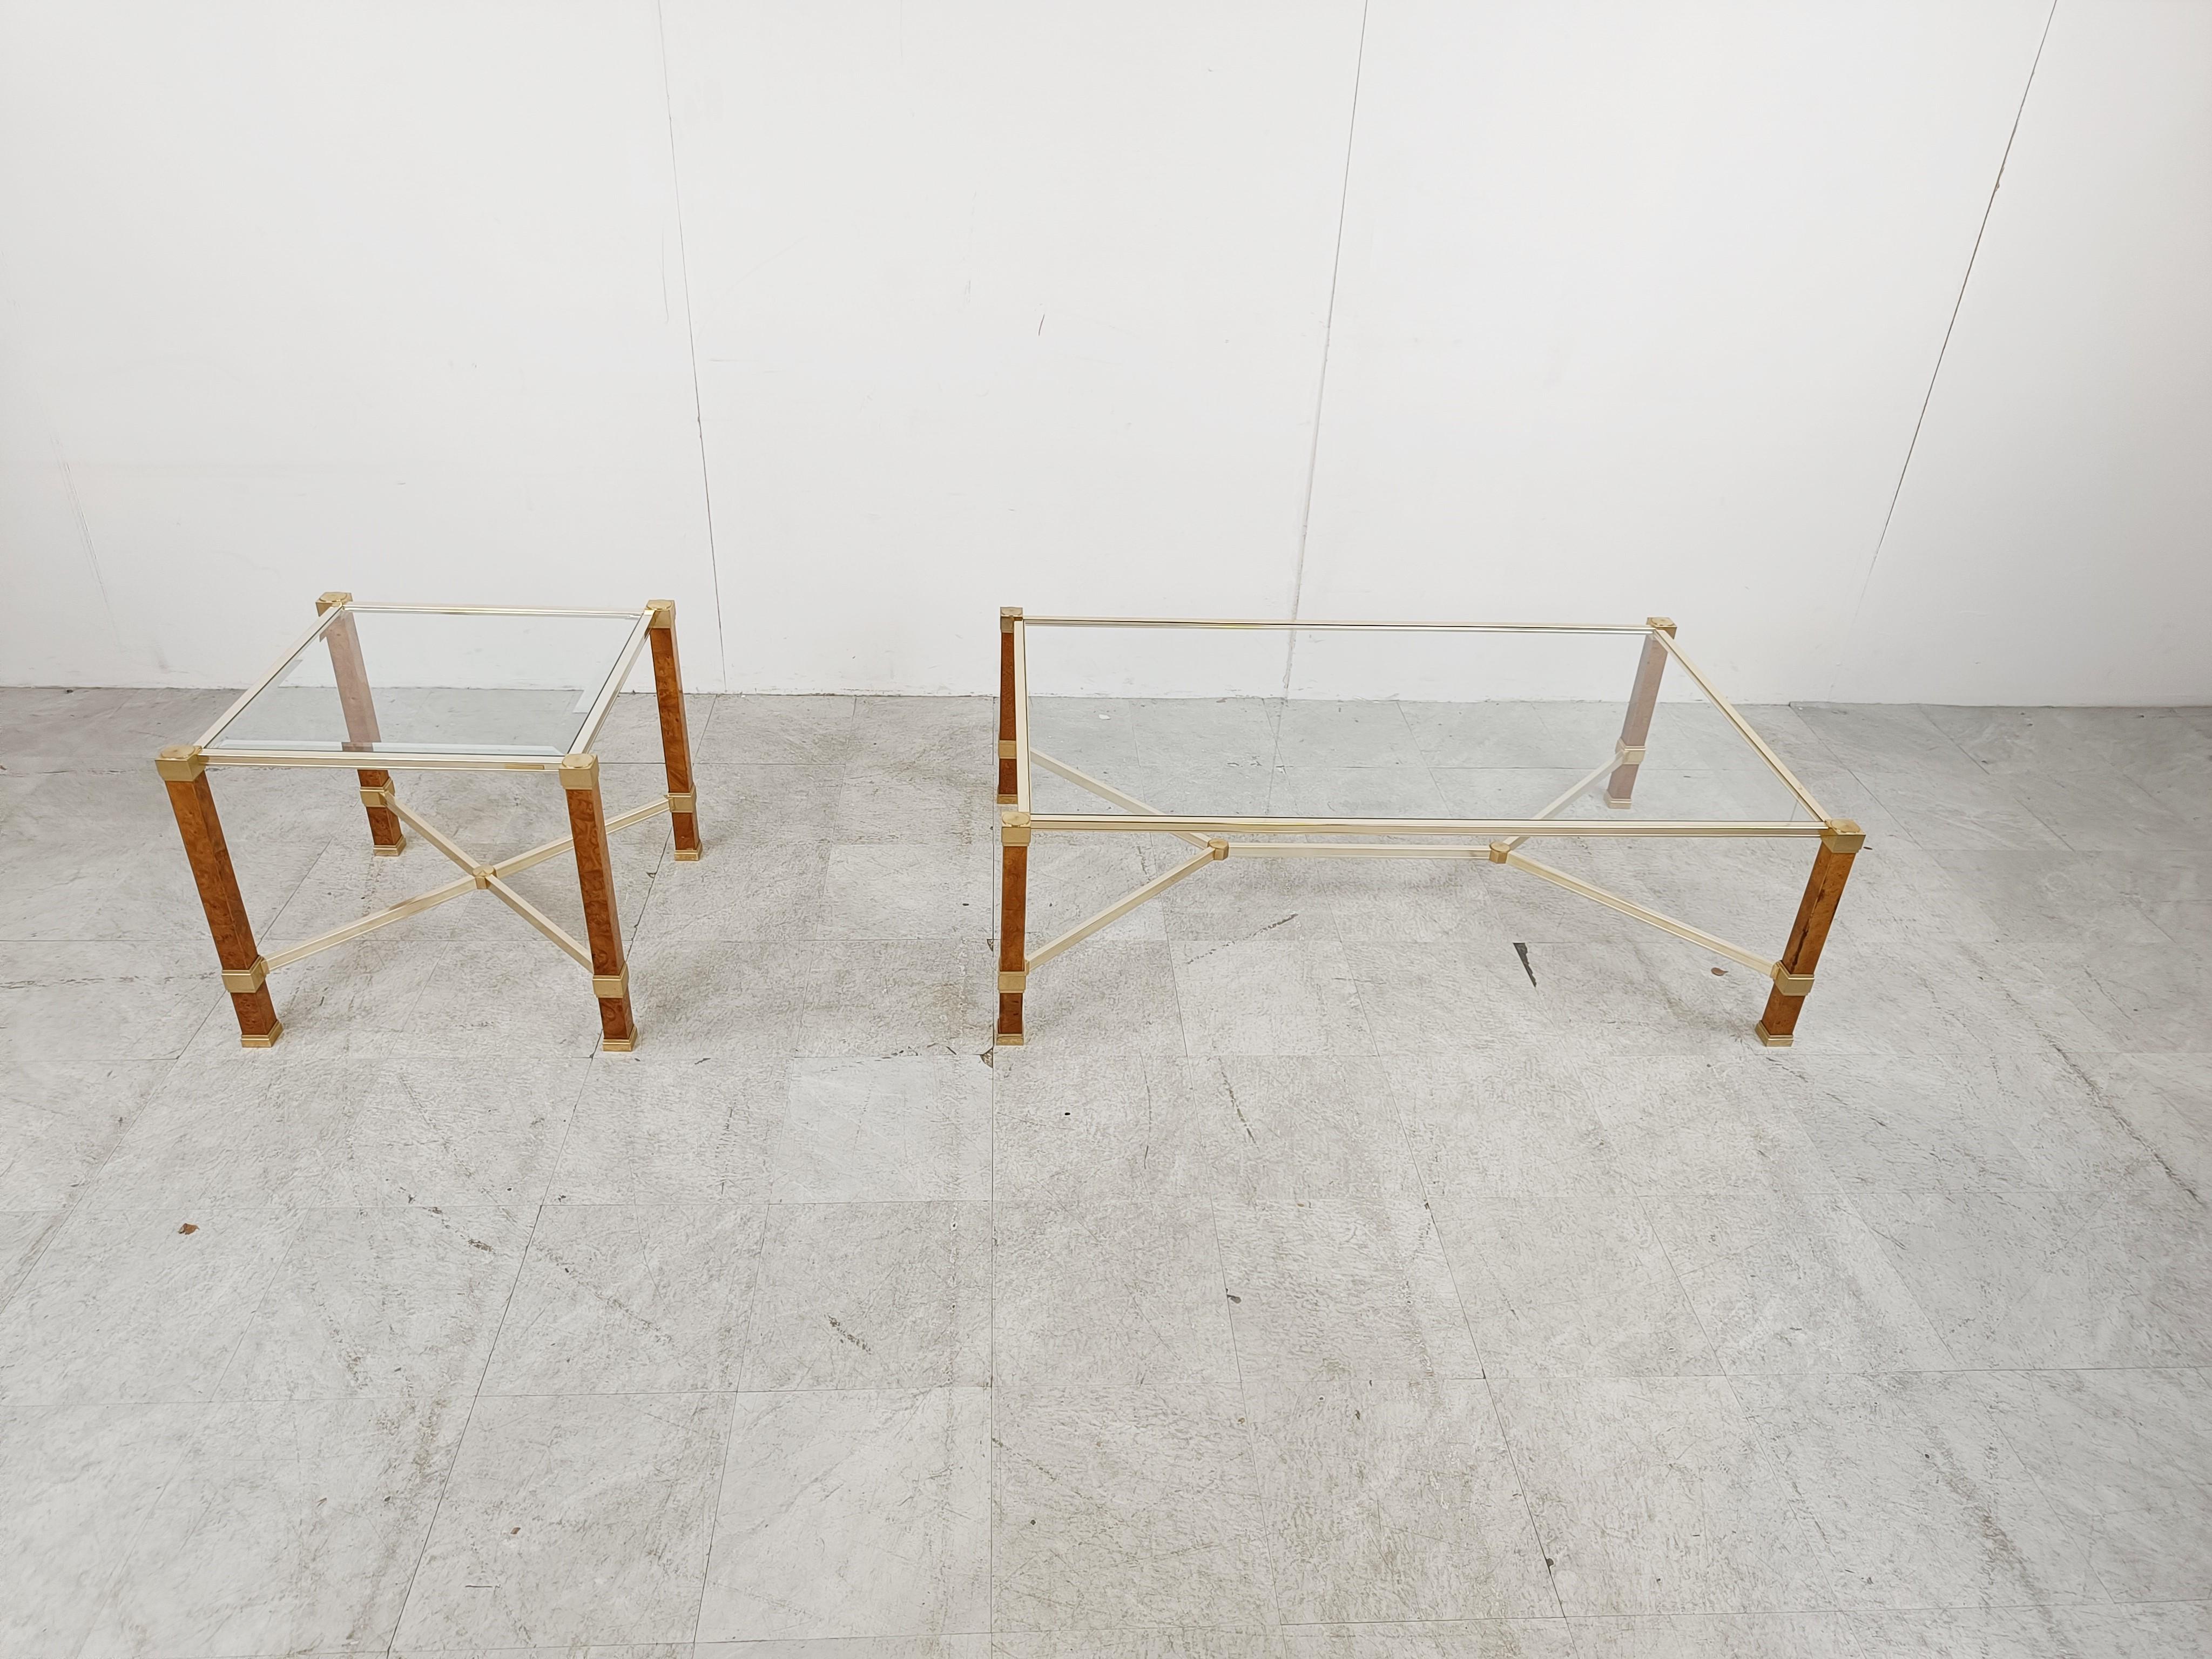 Vintage coffee table and side table set by Pierre Vandel Paris.

the frames are made of brass and burl wood with clear glass tops.

Luxury 1980s glam tables.

Very good condition

1980s - France

Dimensions:
Coffee table:
Height: 41cm/16.14